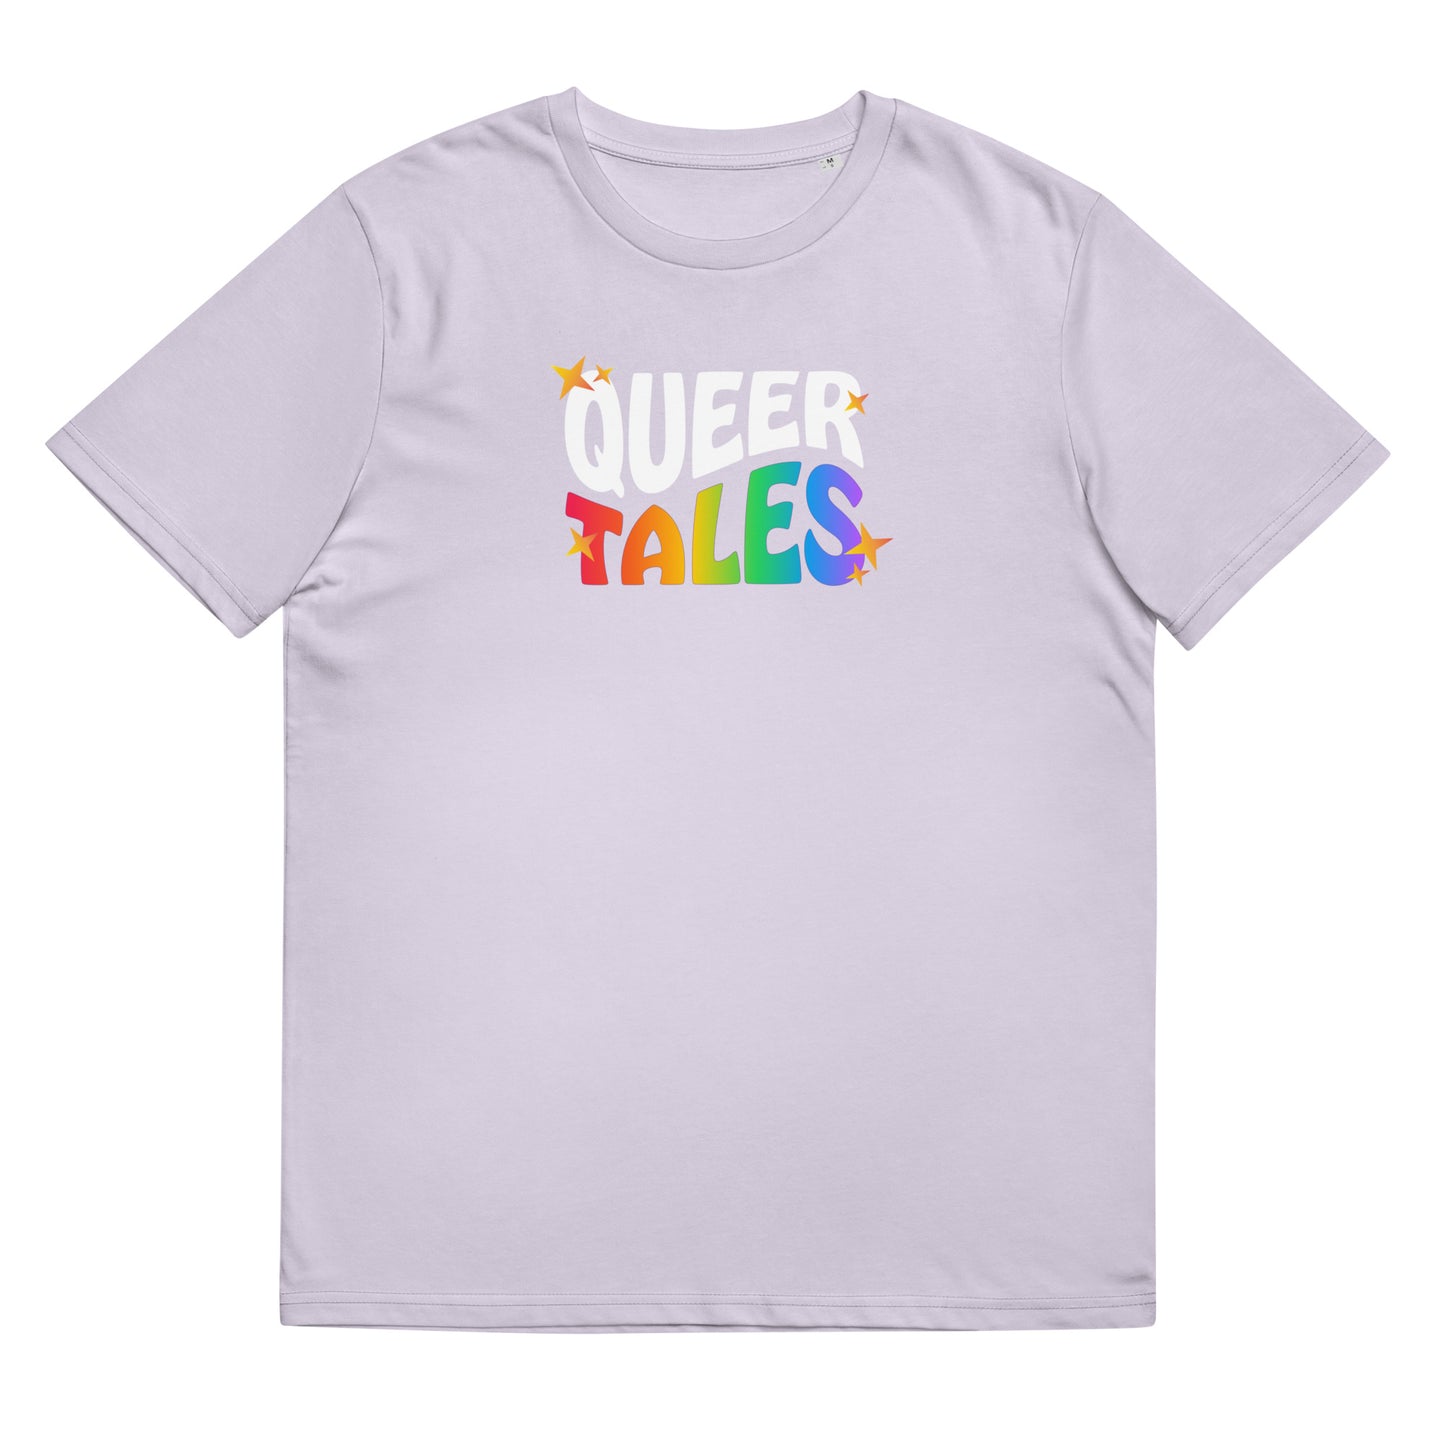 Organic Cotton T-shirt: Queer Tales Graphic Print